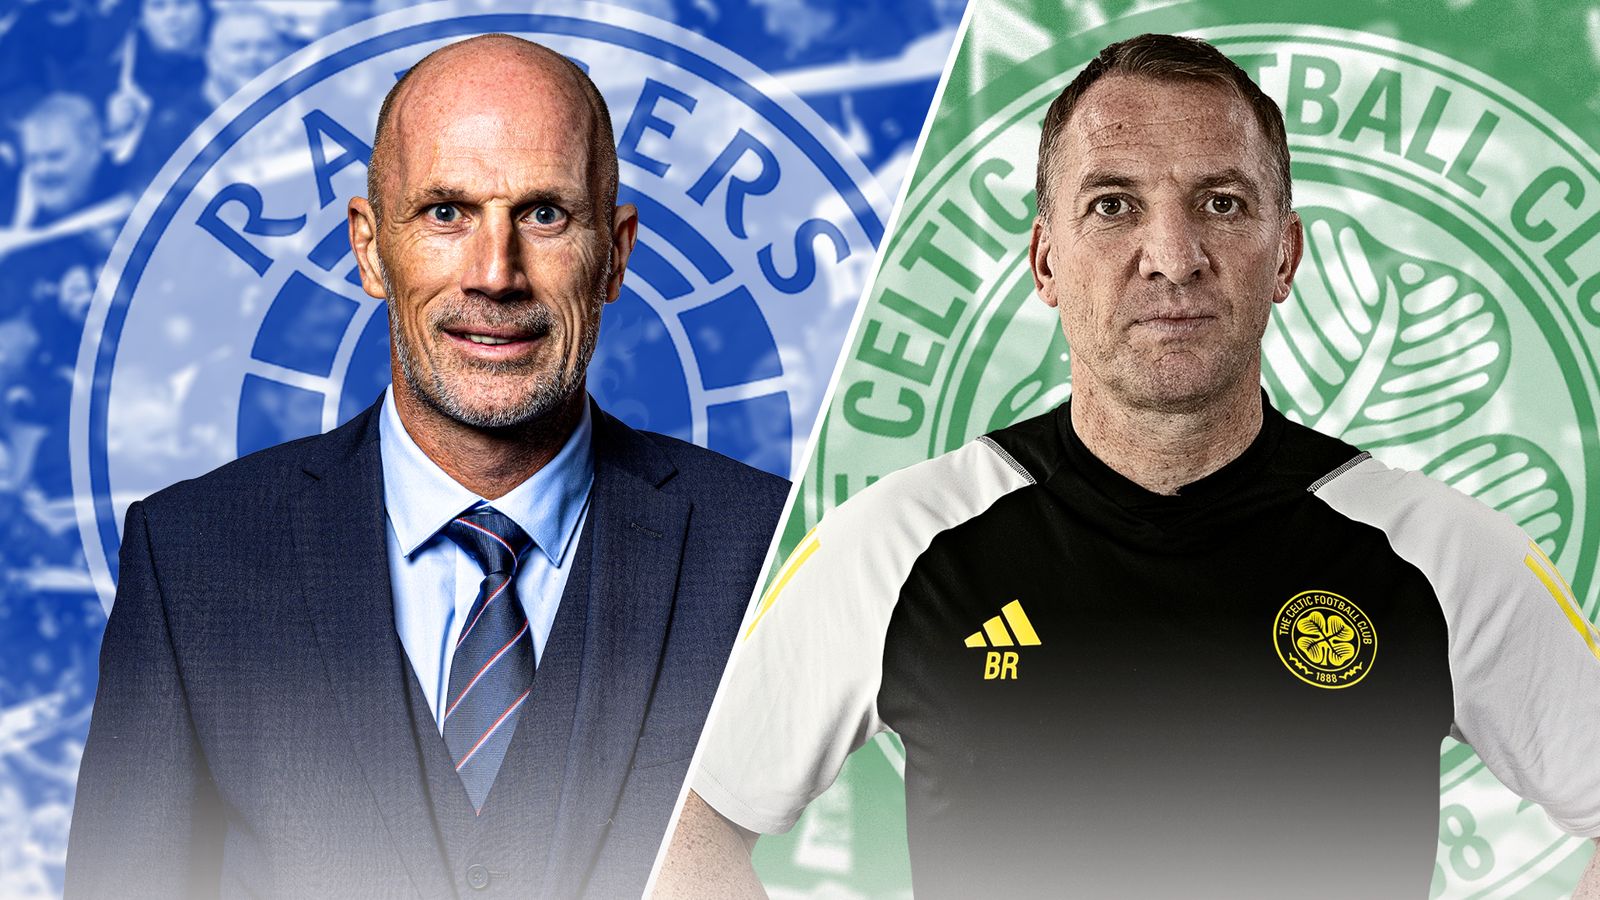 Rangers vs Celtic: Philippe Clement and Brendan Rodgers look ahead to Sunday's Old Firm | Football News